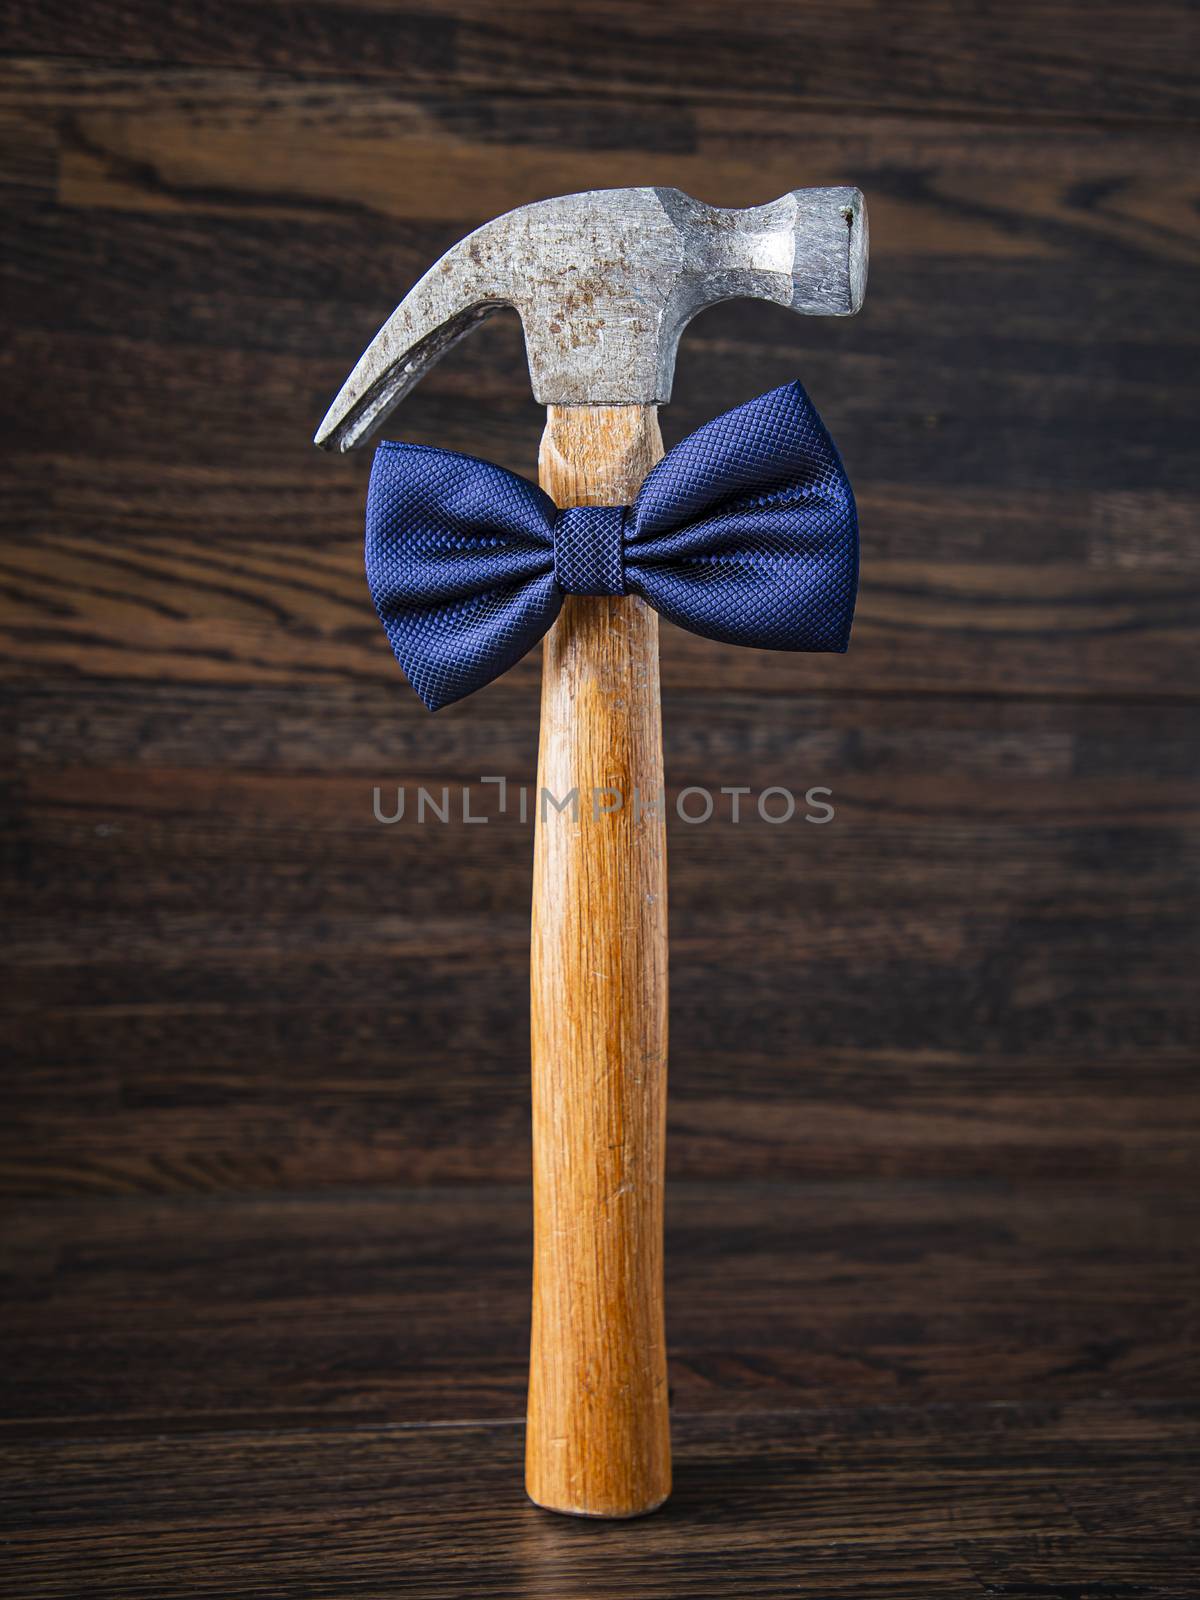 Fancy old time hammer by mypstudio